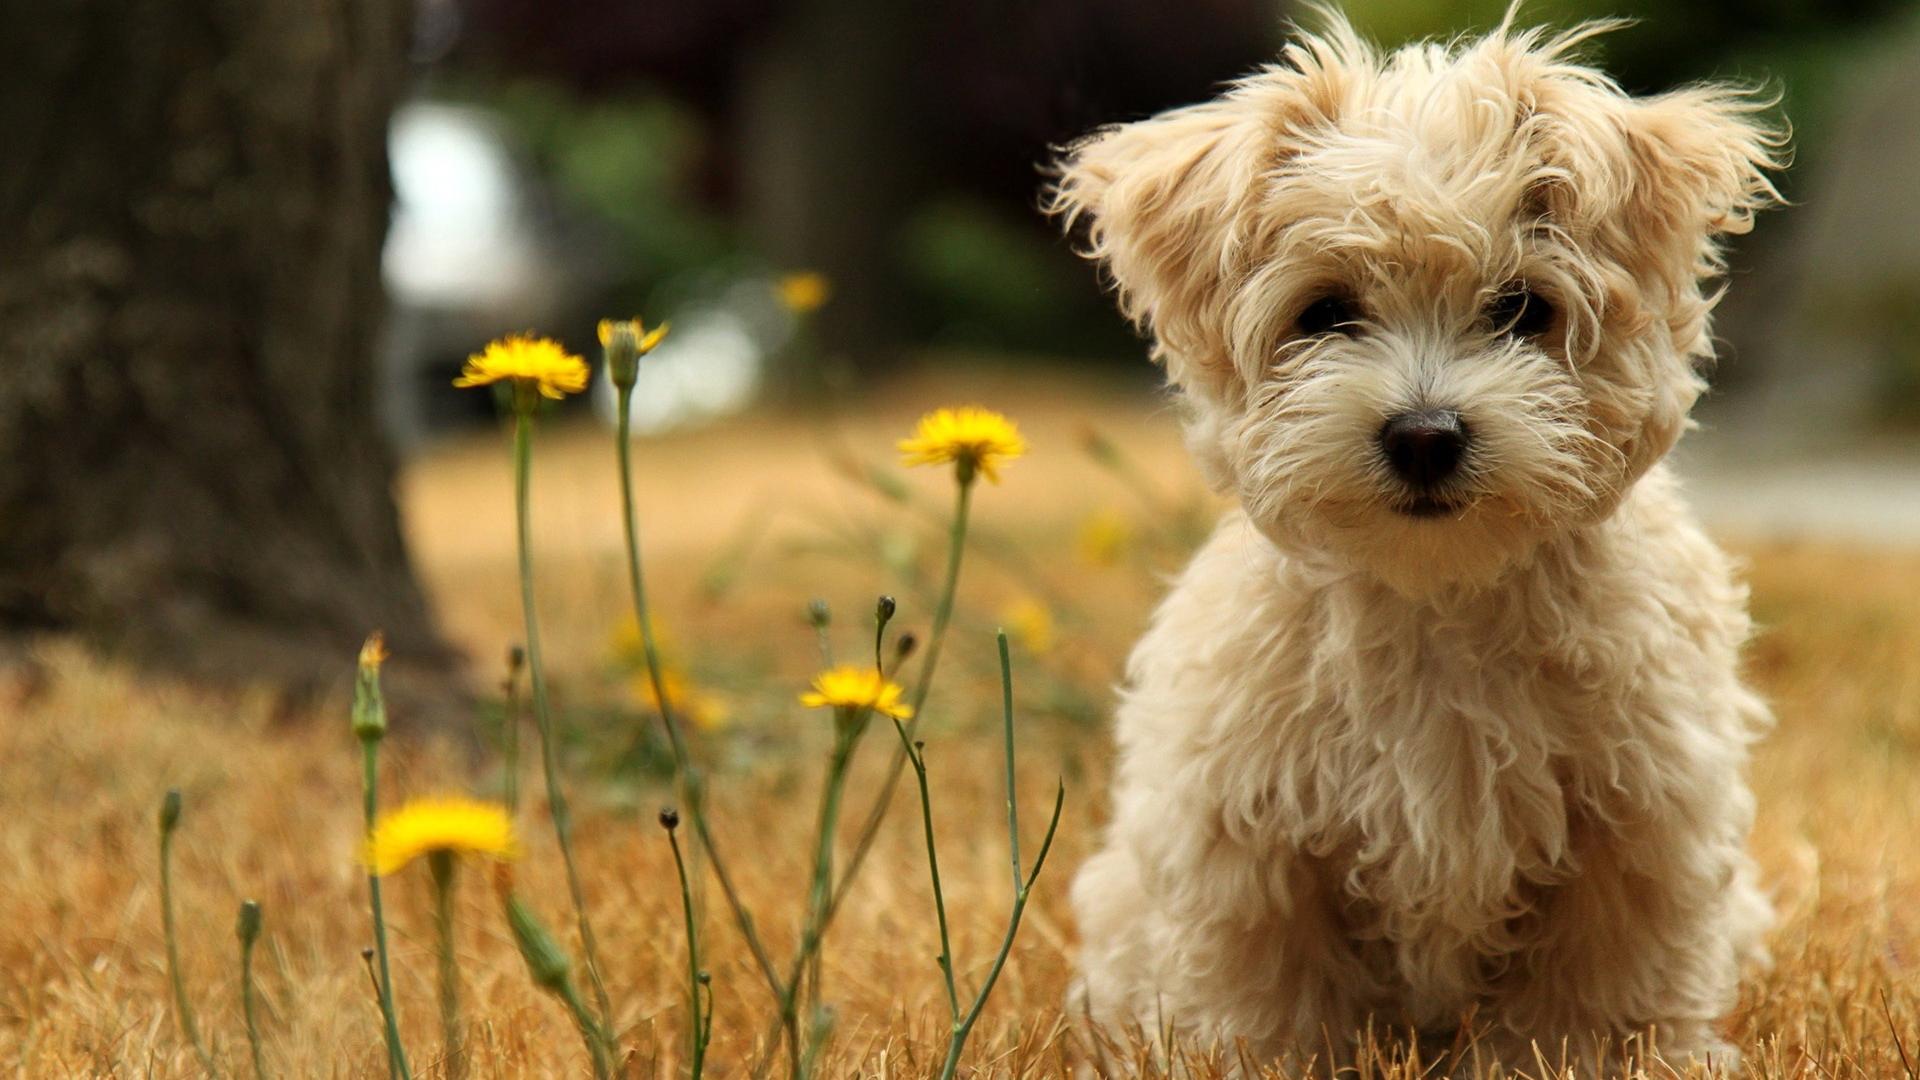 Download Cute Dog Pictures Background Wallpaper | Full HD Wallpapers